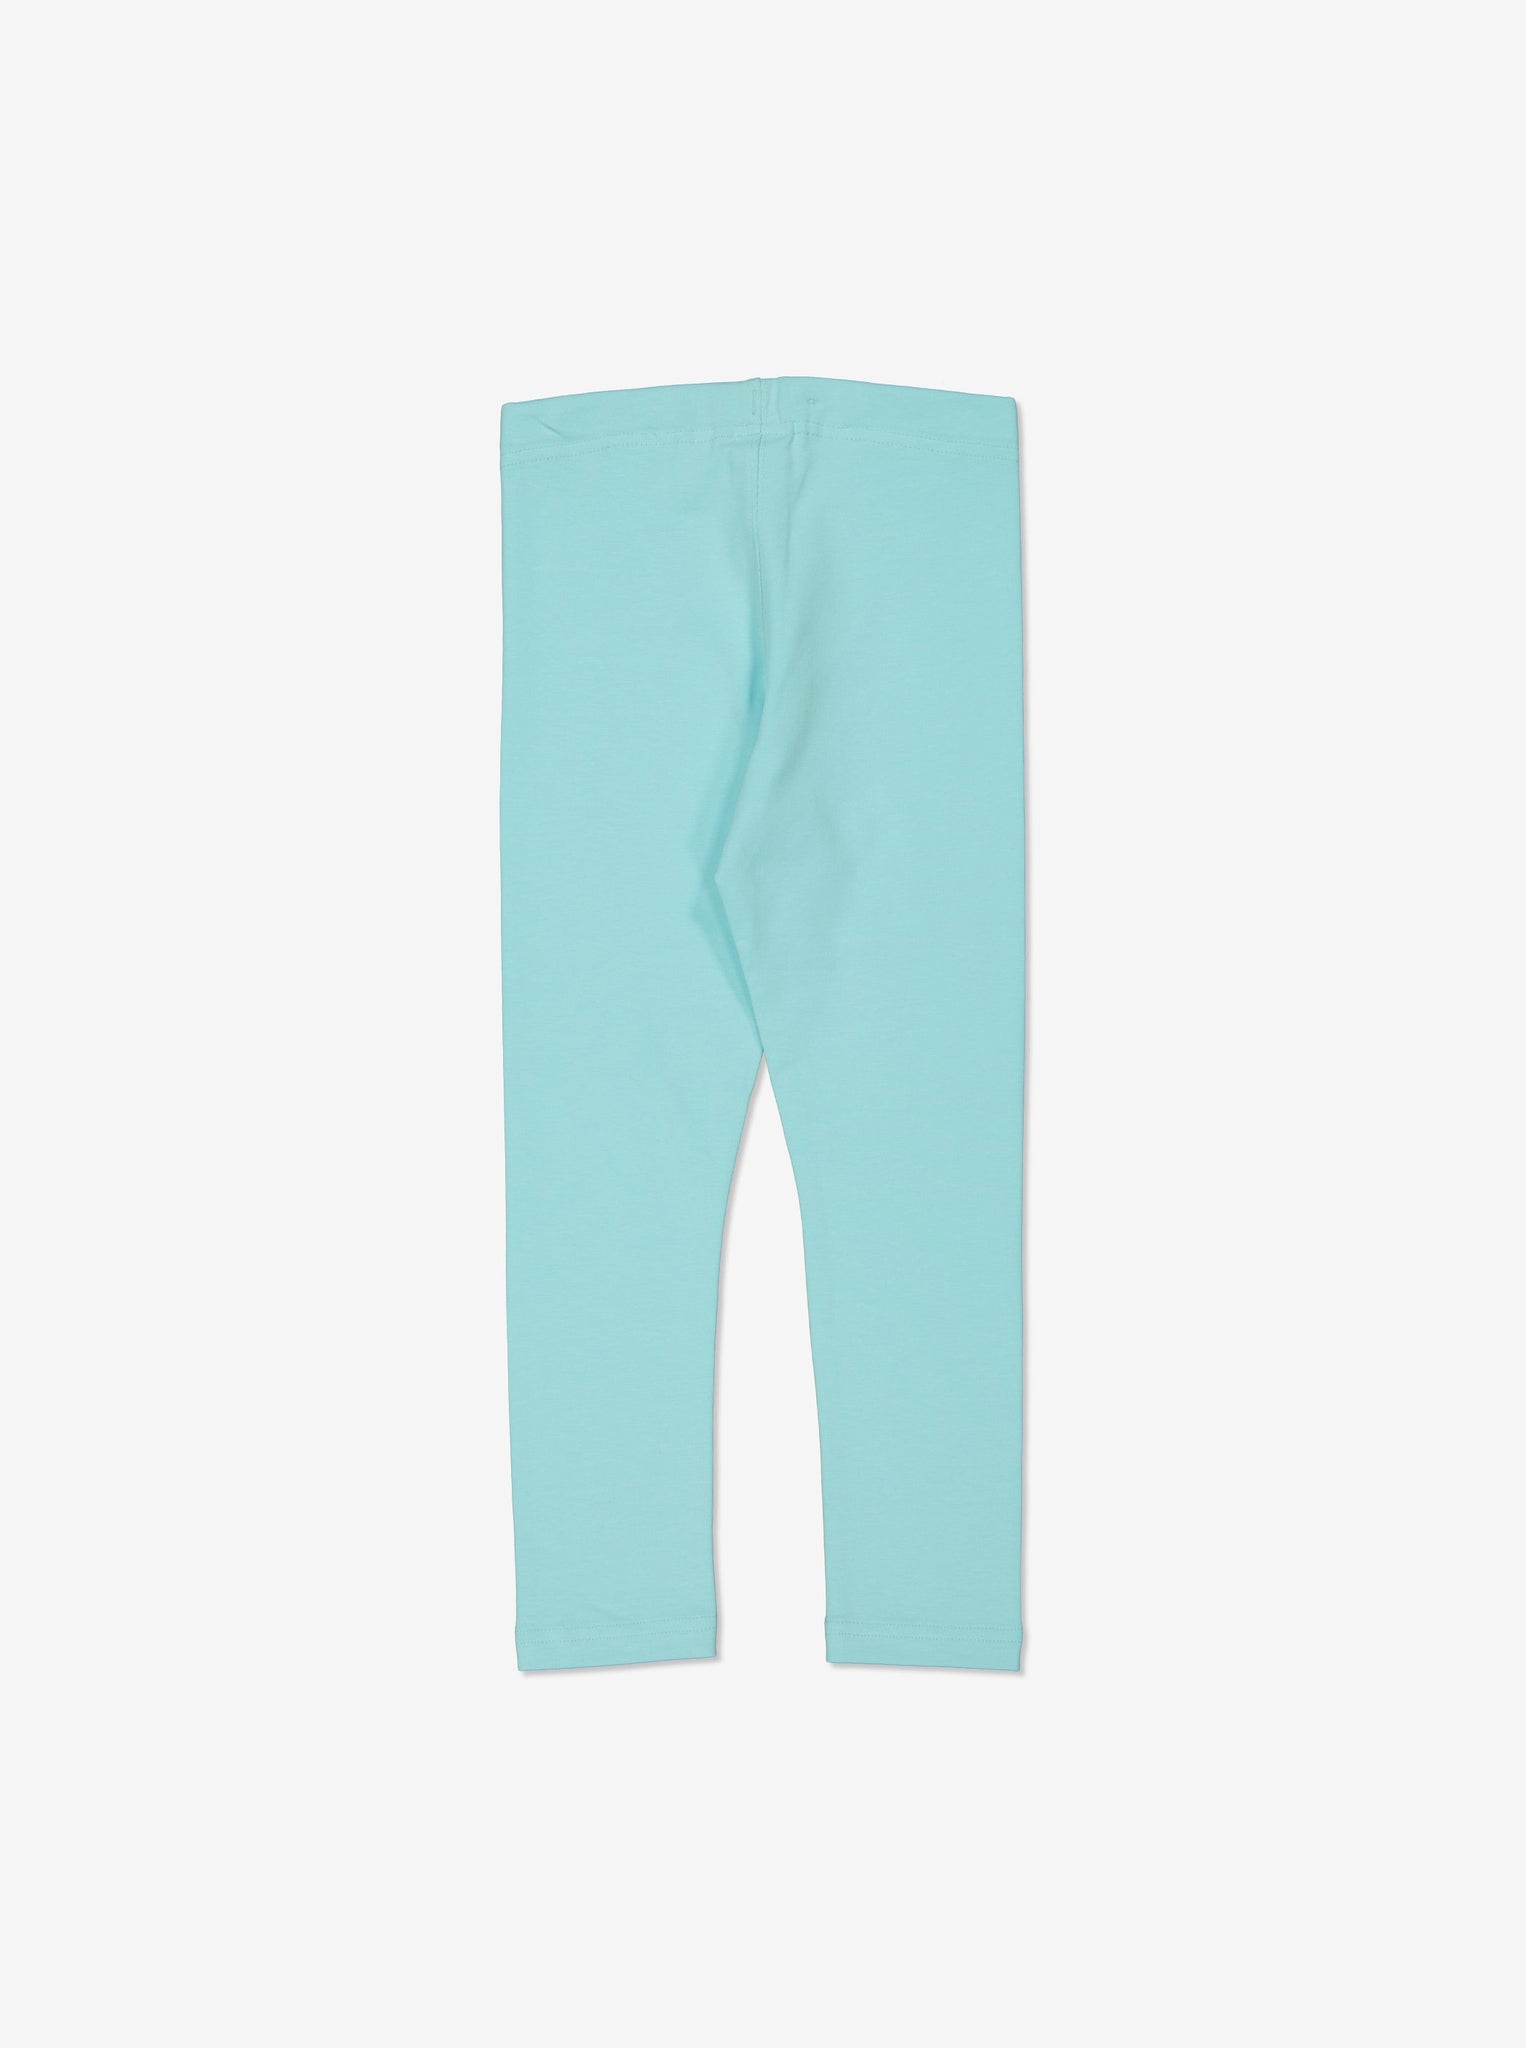 Organic Cotton Blue Kids Leggings from Polarn O. Pyret Kidswear. Made using sustainable sourced materials.